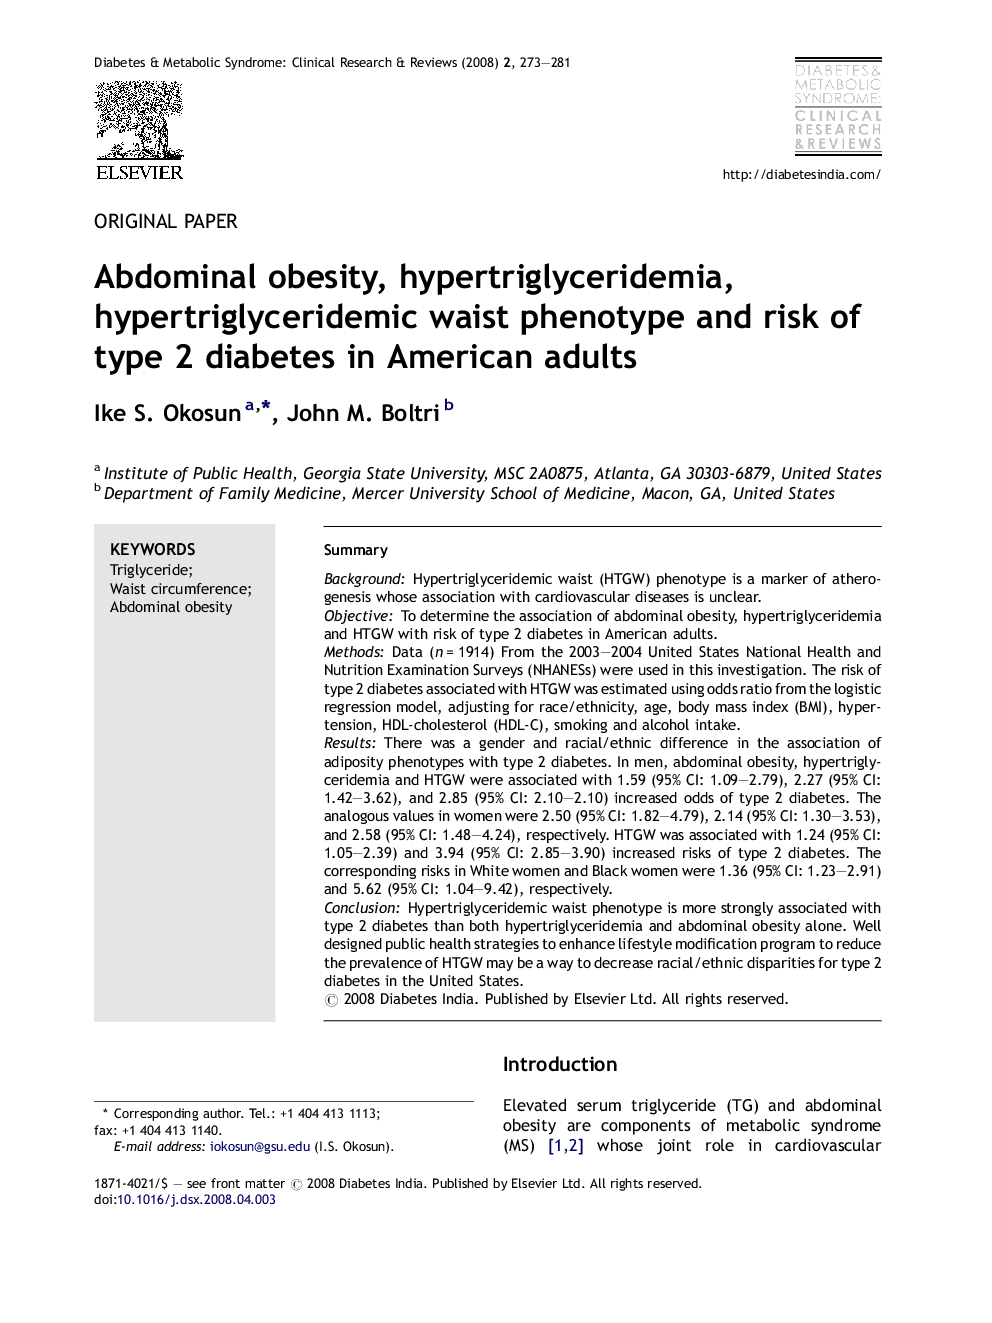 Abdominal obesity, hypertriglyceridemia, hypertriglyceridemic waist phenotype and risk of type 2 diabetes in American adults